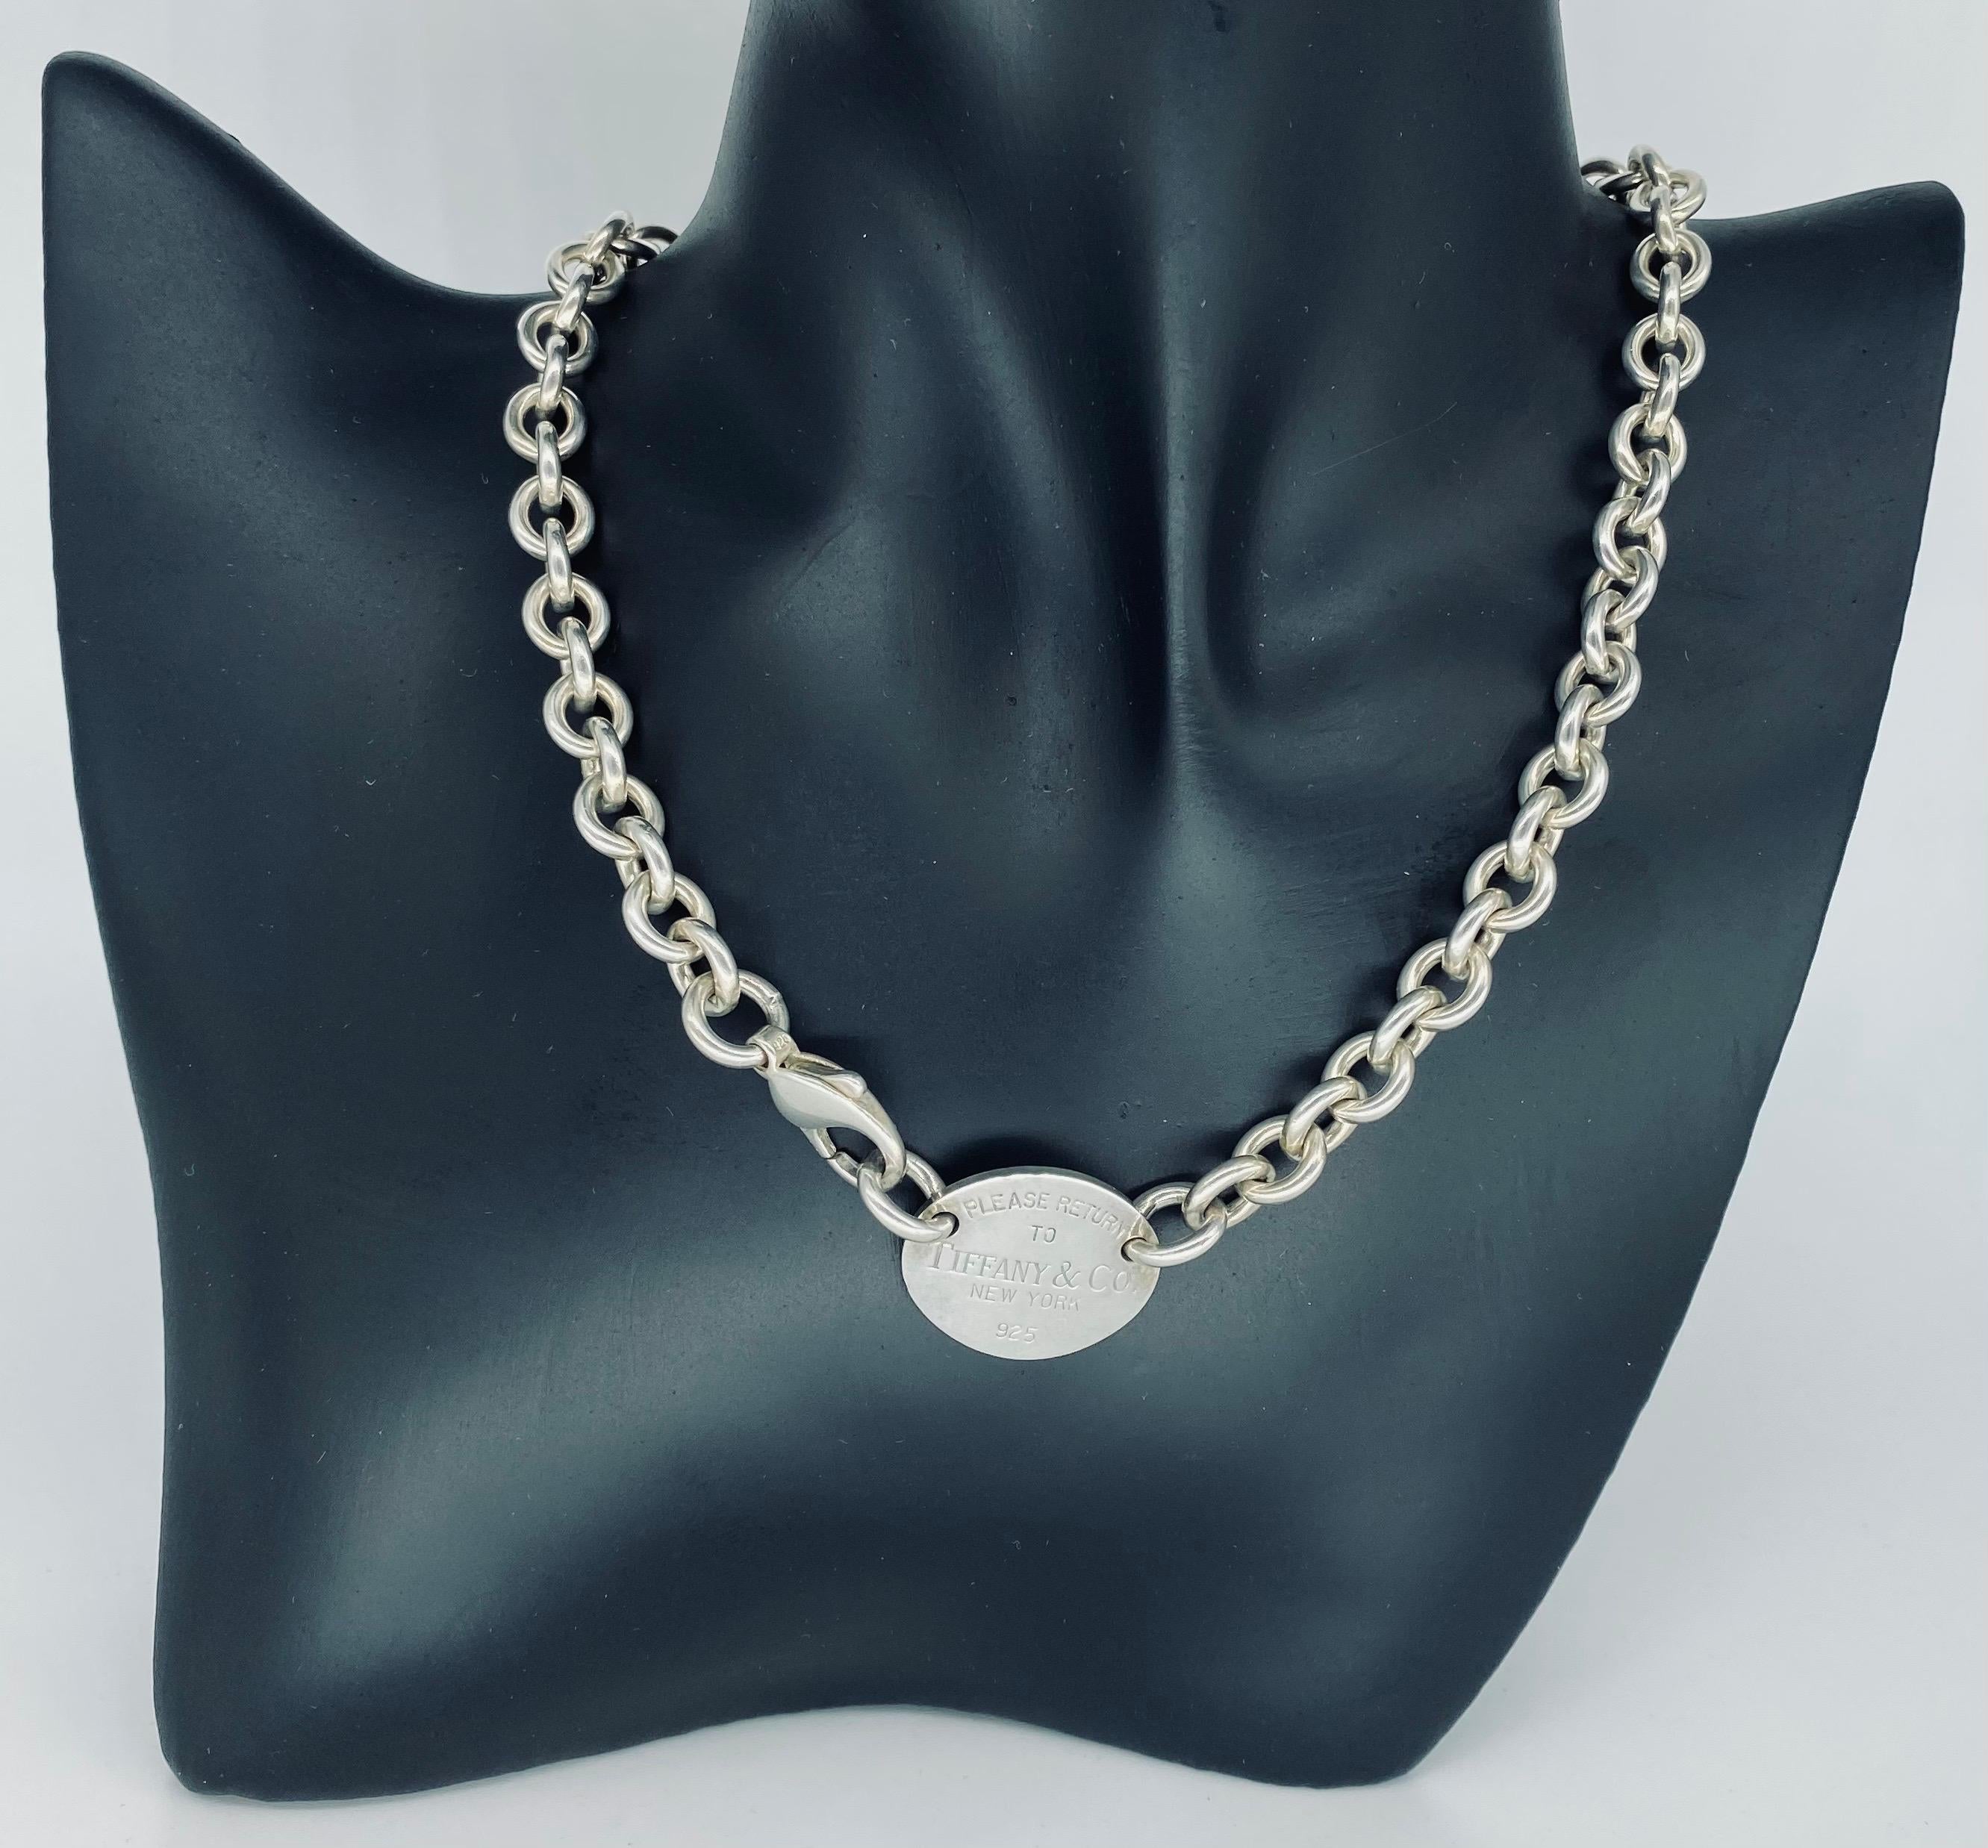 Please Return To Tiffany & Co. New York 925 Sterling Silver Choker Necklace. Classic Tiffany & Co iconic tag necklace. The necklace is 16 inches long also considered to be a choker style. 100% authentic Tiffany & co necklace. No original box or